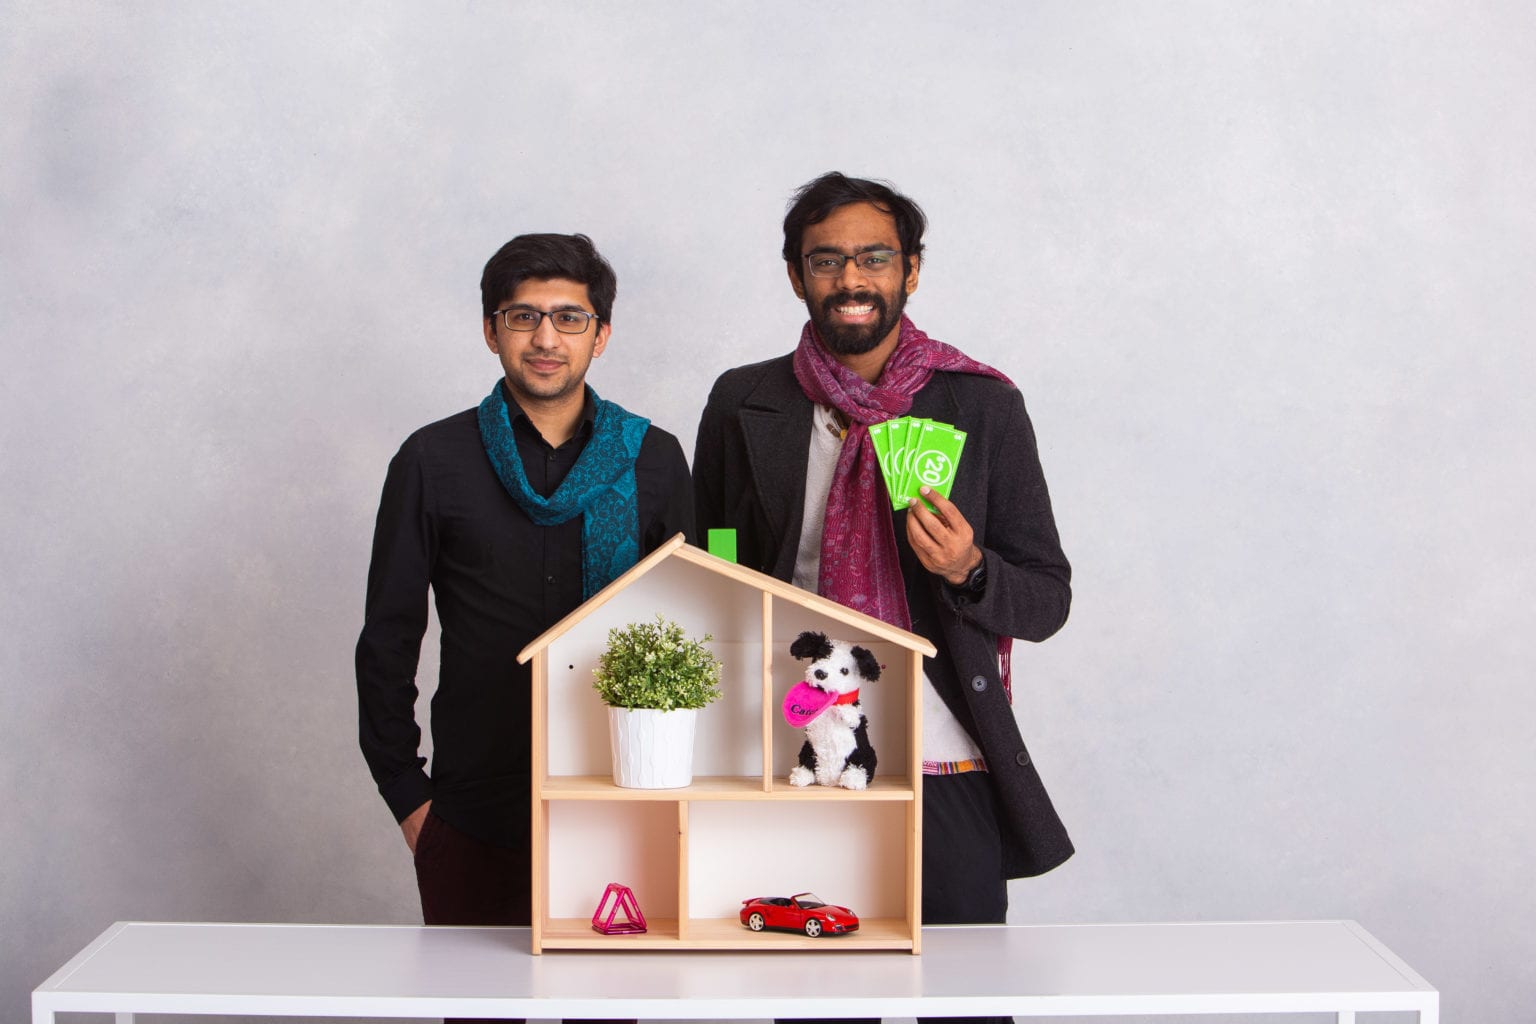 Rashid and Abhiroop standing in front of a model house